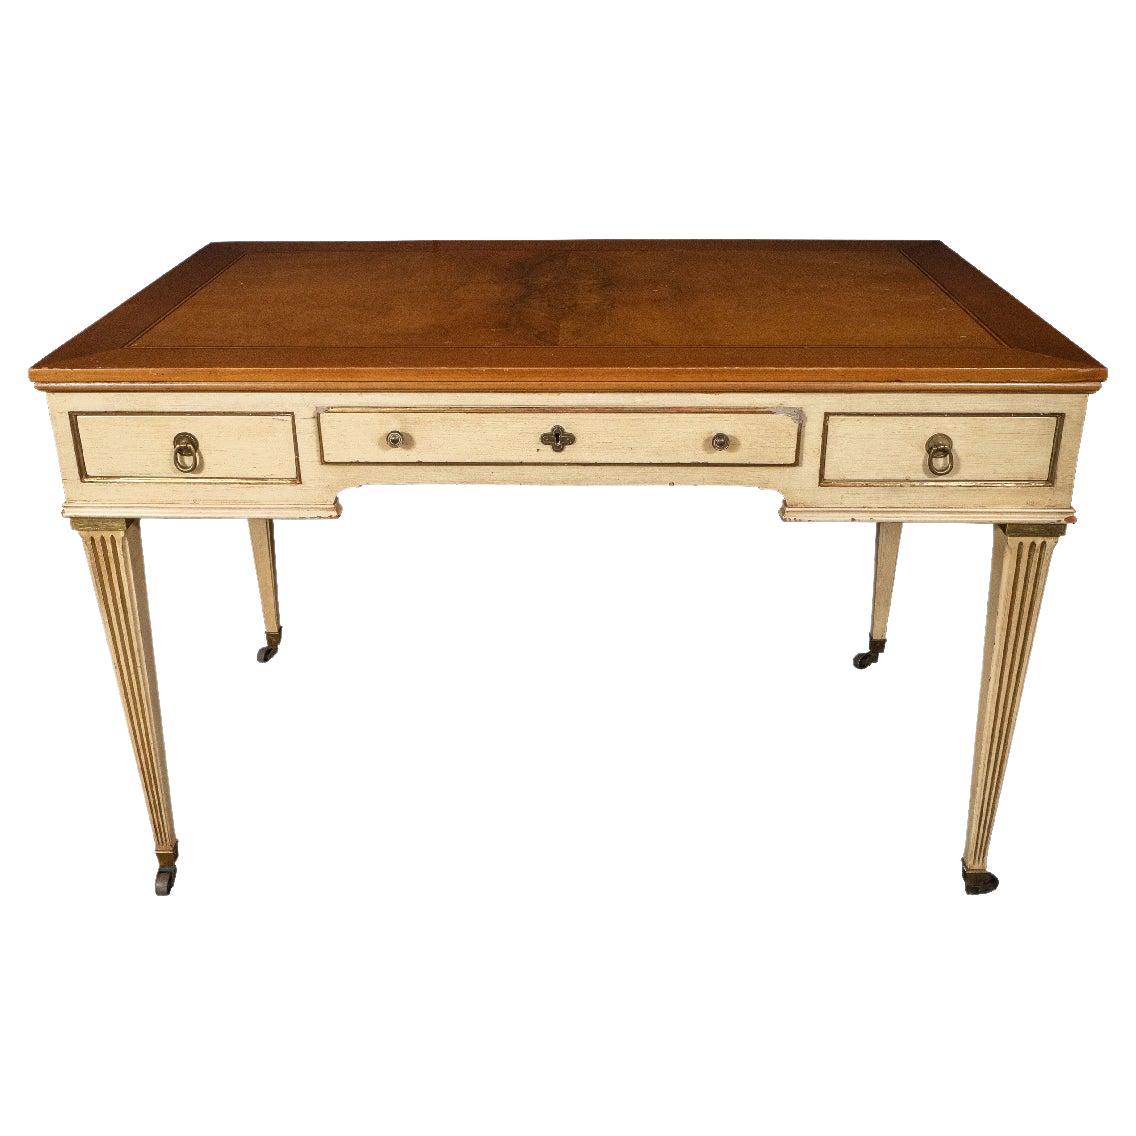 Widdicomb Painted and Gilt Wood Desk For Sale